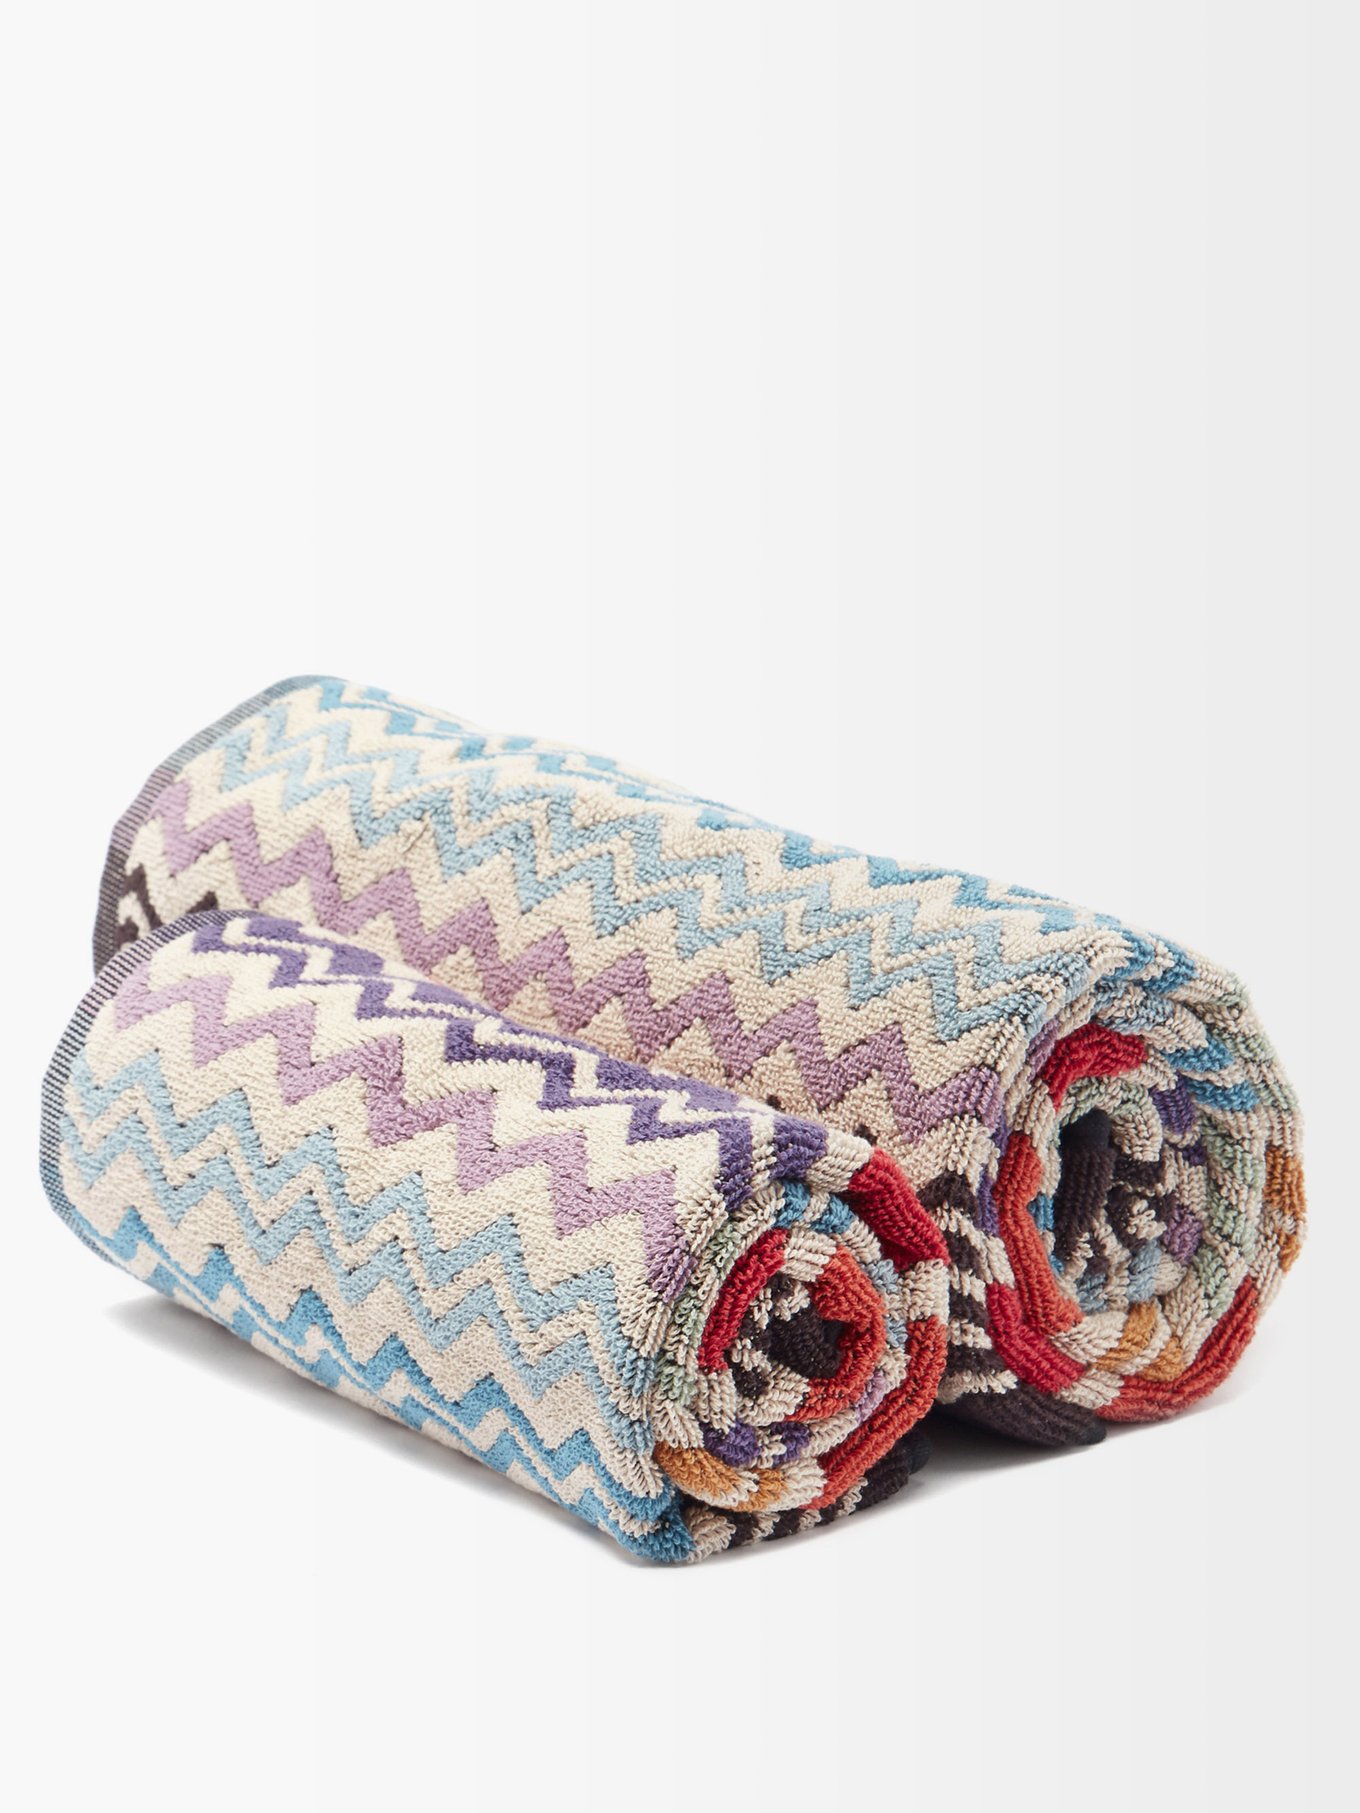 Details about   Missoni Home Rufus Terry Bath Beach Towel Signature Rainbow Zigzag $220 MSRP New 